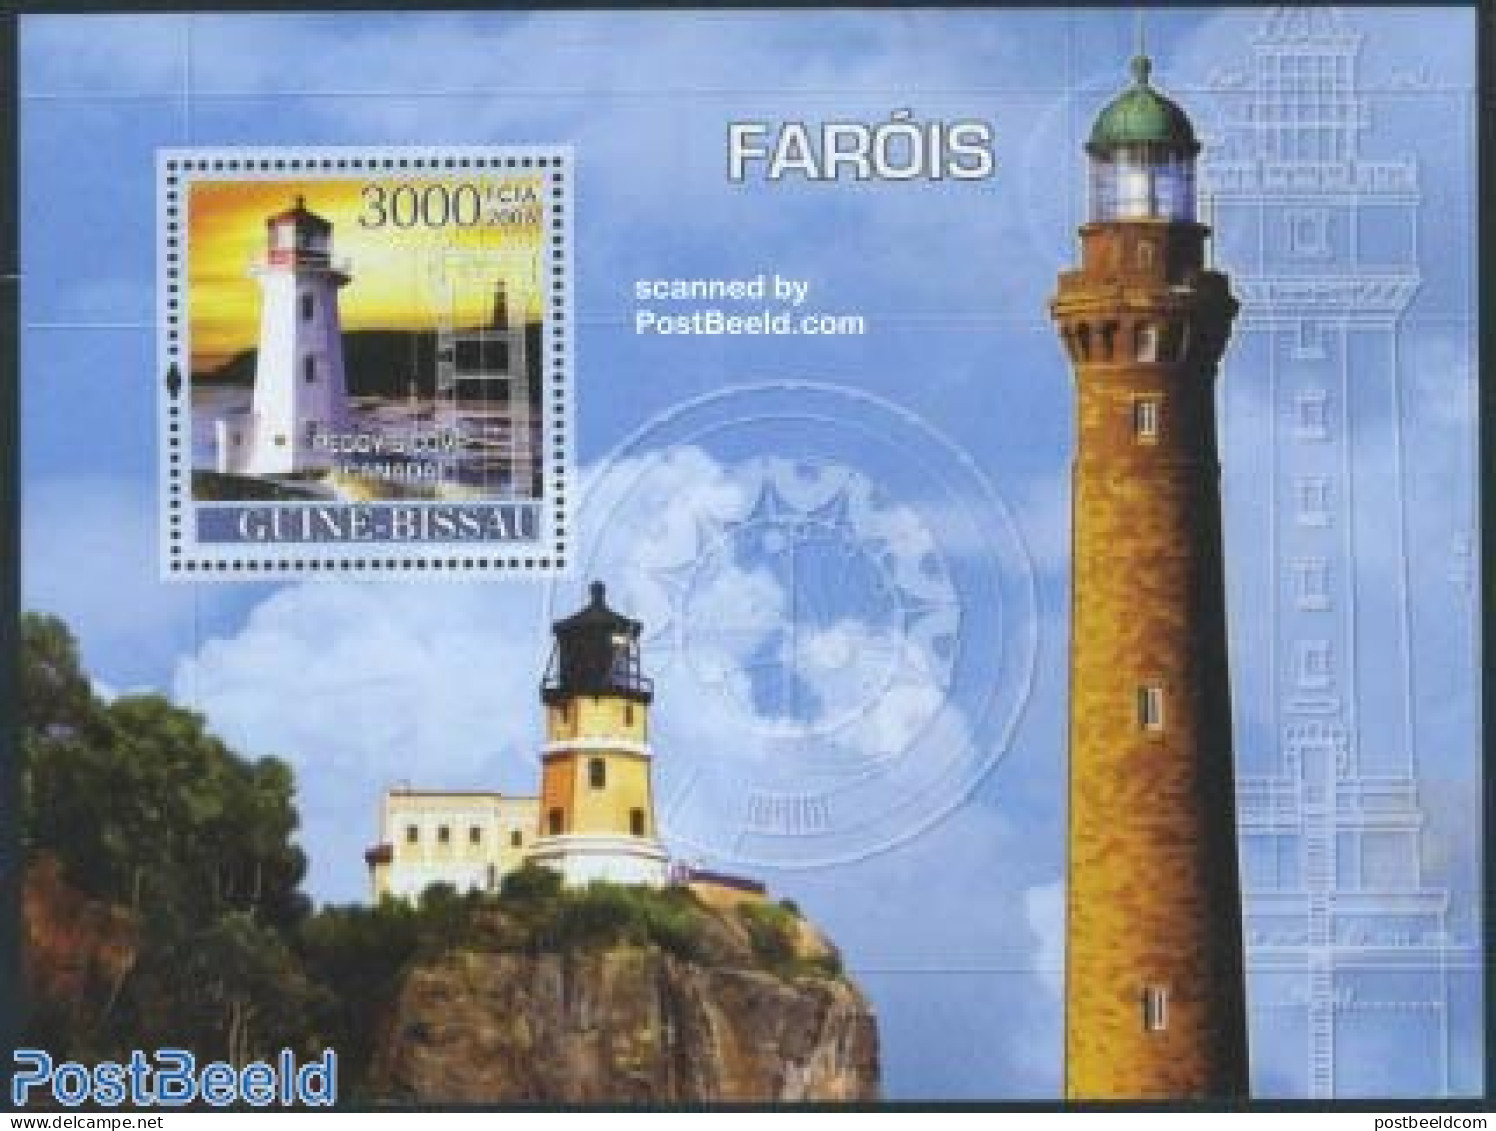 Guinea Bissau 2008 Lighthouses S/s, Mint NH, Various - Lighthouses & Safety At Sea - Leuchttürme